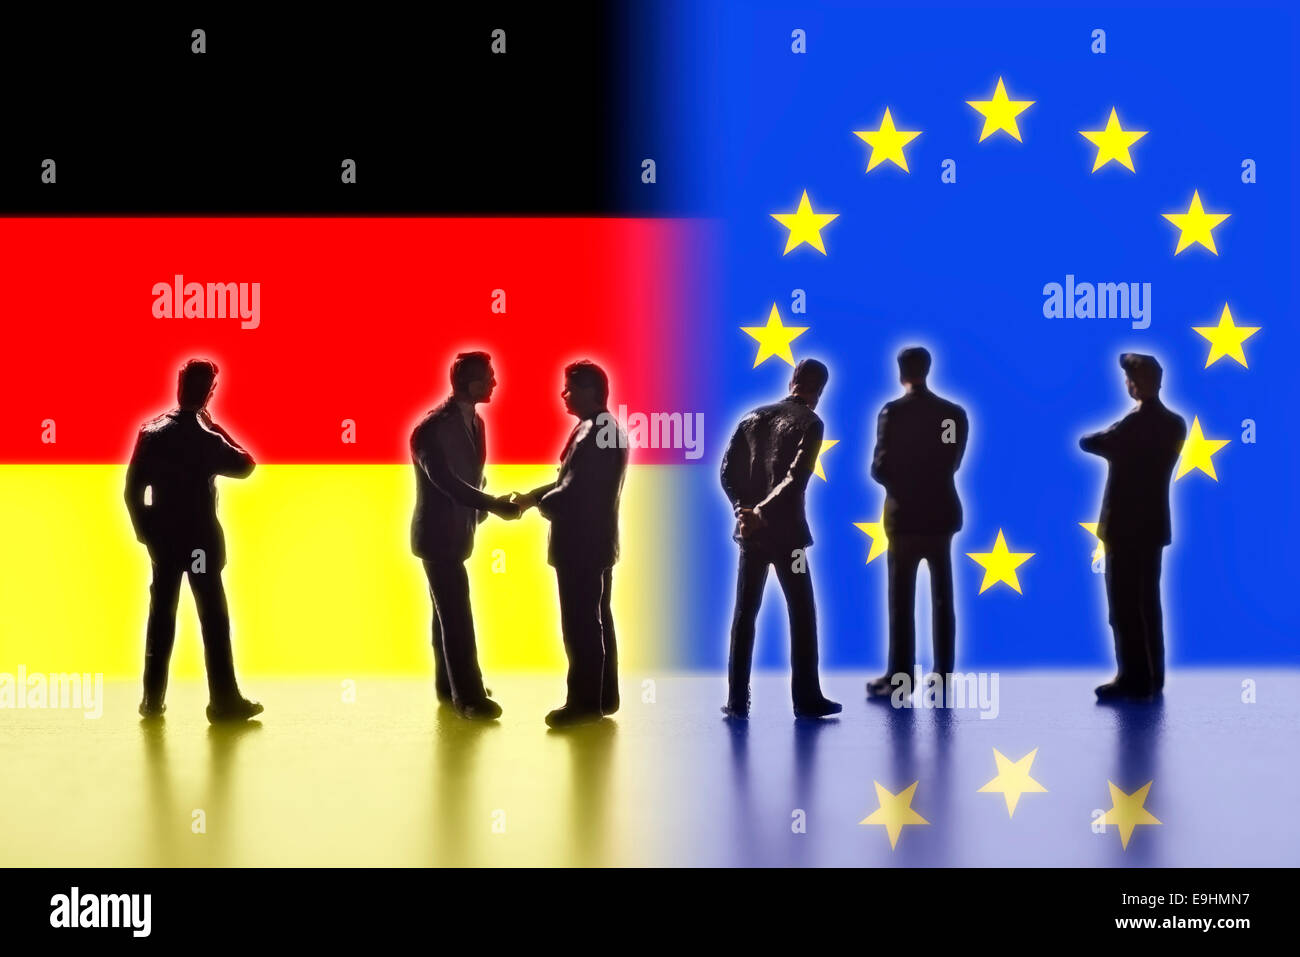 Model figures symbolizing the politicians are faced with the flags of Germany and the EU. Two of them shake hands. Digital Composite (DC) Stock Photo